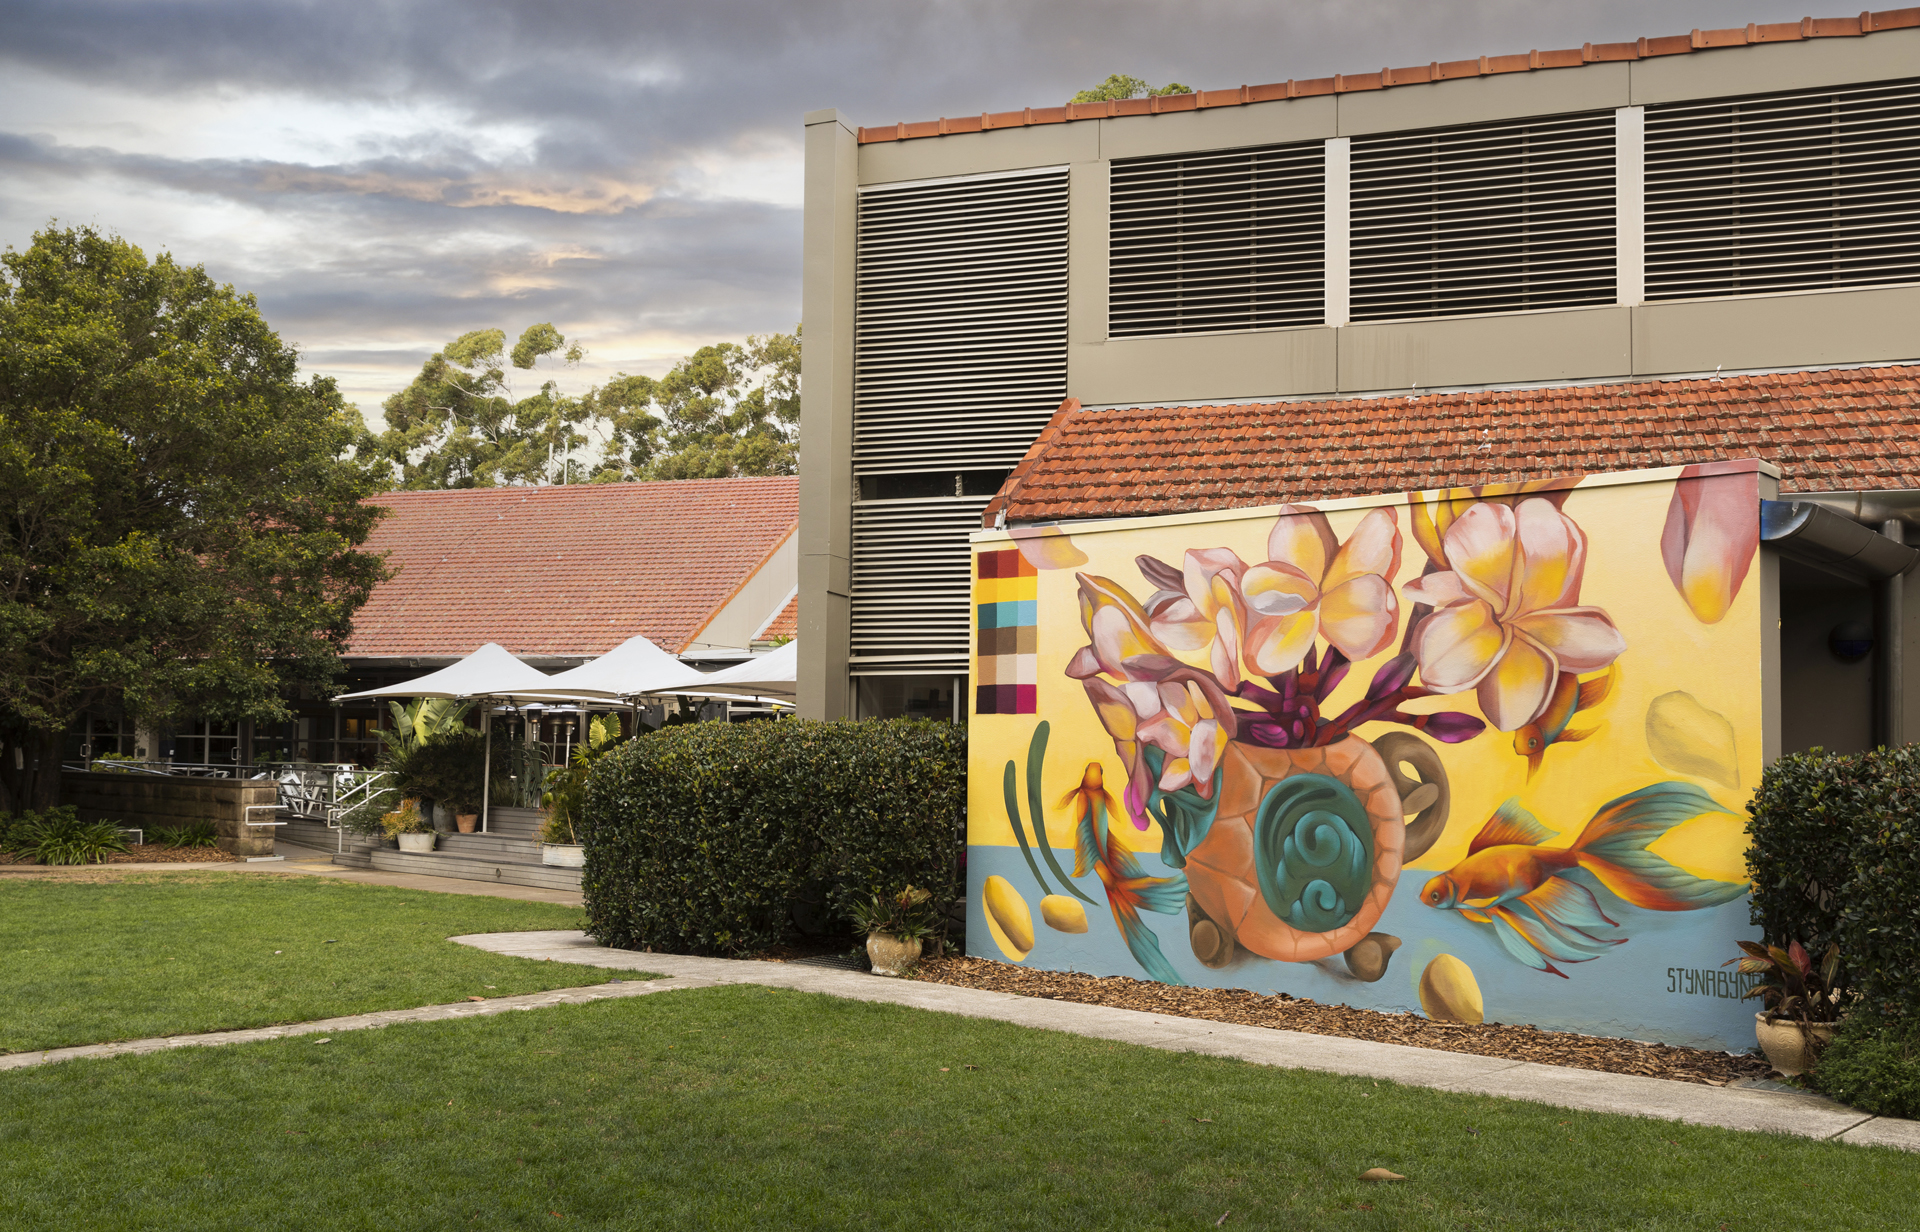 Photograph of a colourful outdoor mural featuring fish, frangipani flowers and a teapot.